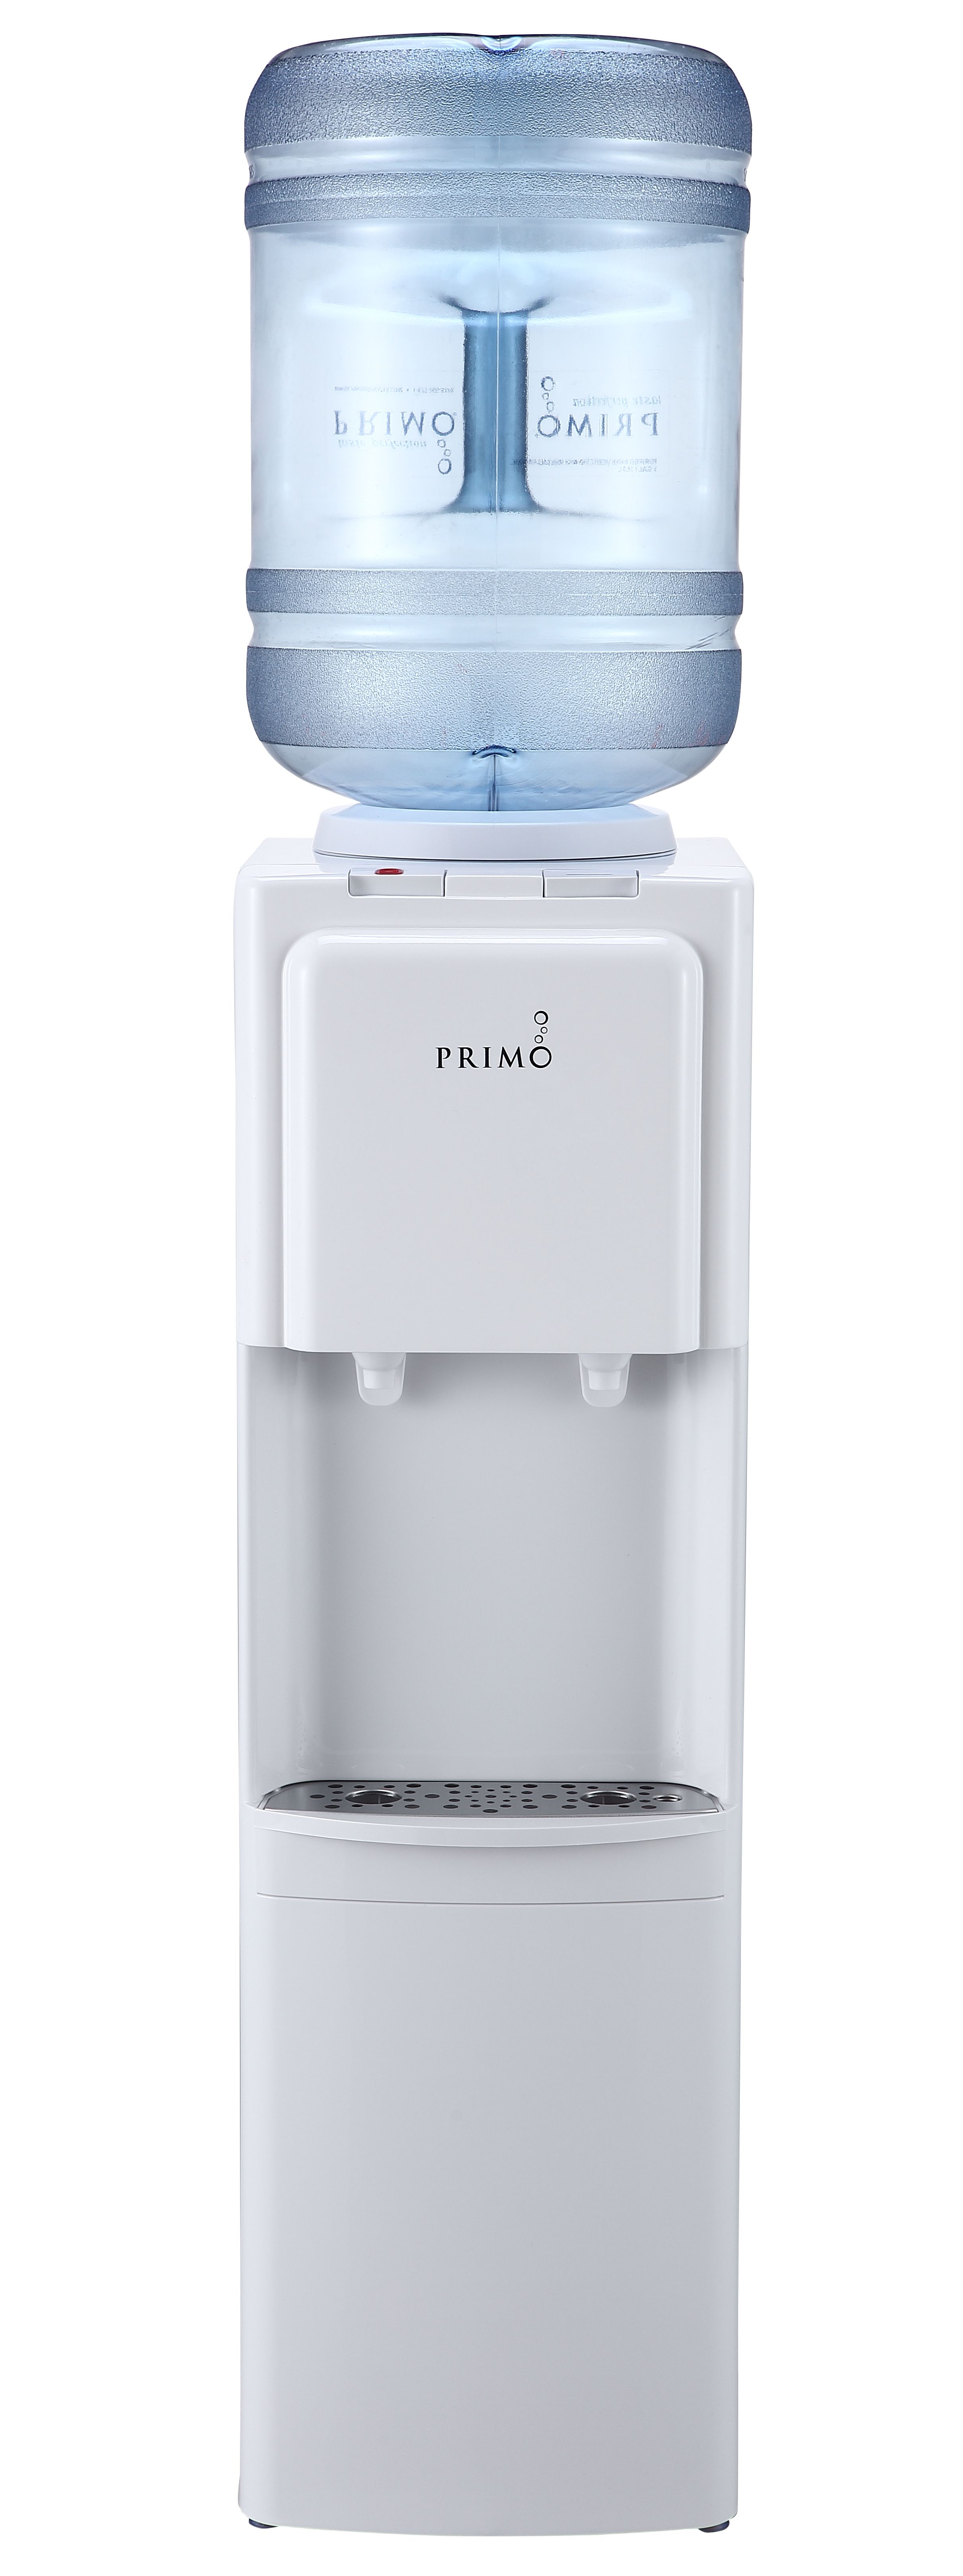 Primo® Water Dispenser Top Loading 36" Height, Hot and Cold Temperature, White 3 or 5 Gallon - image 1 of 10